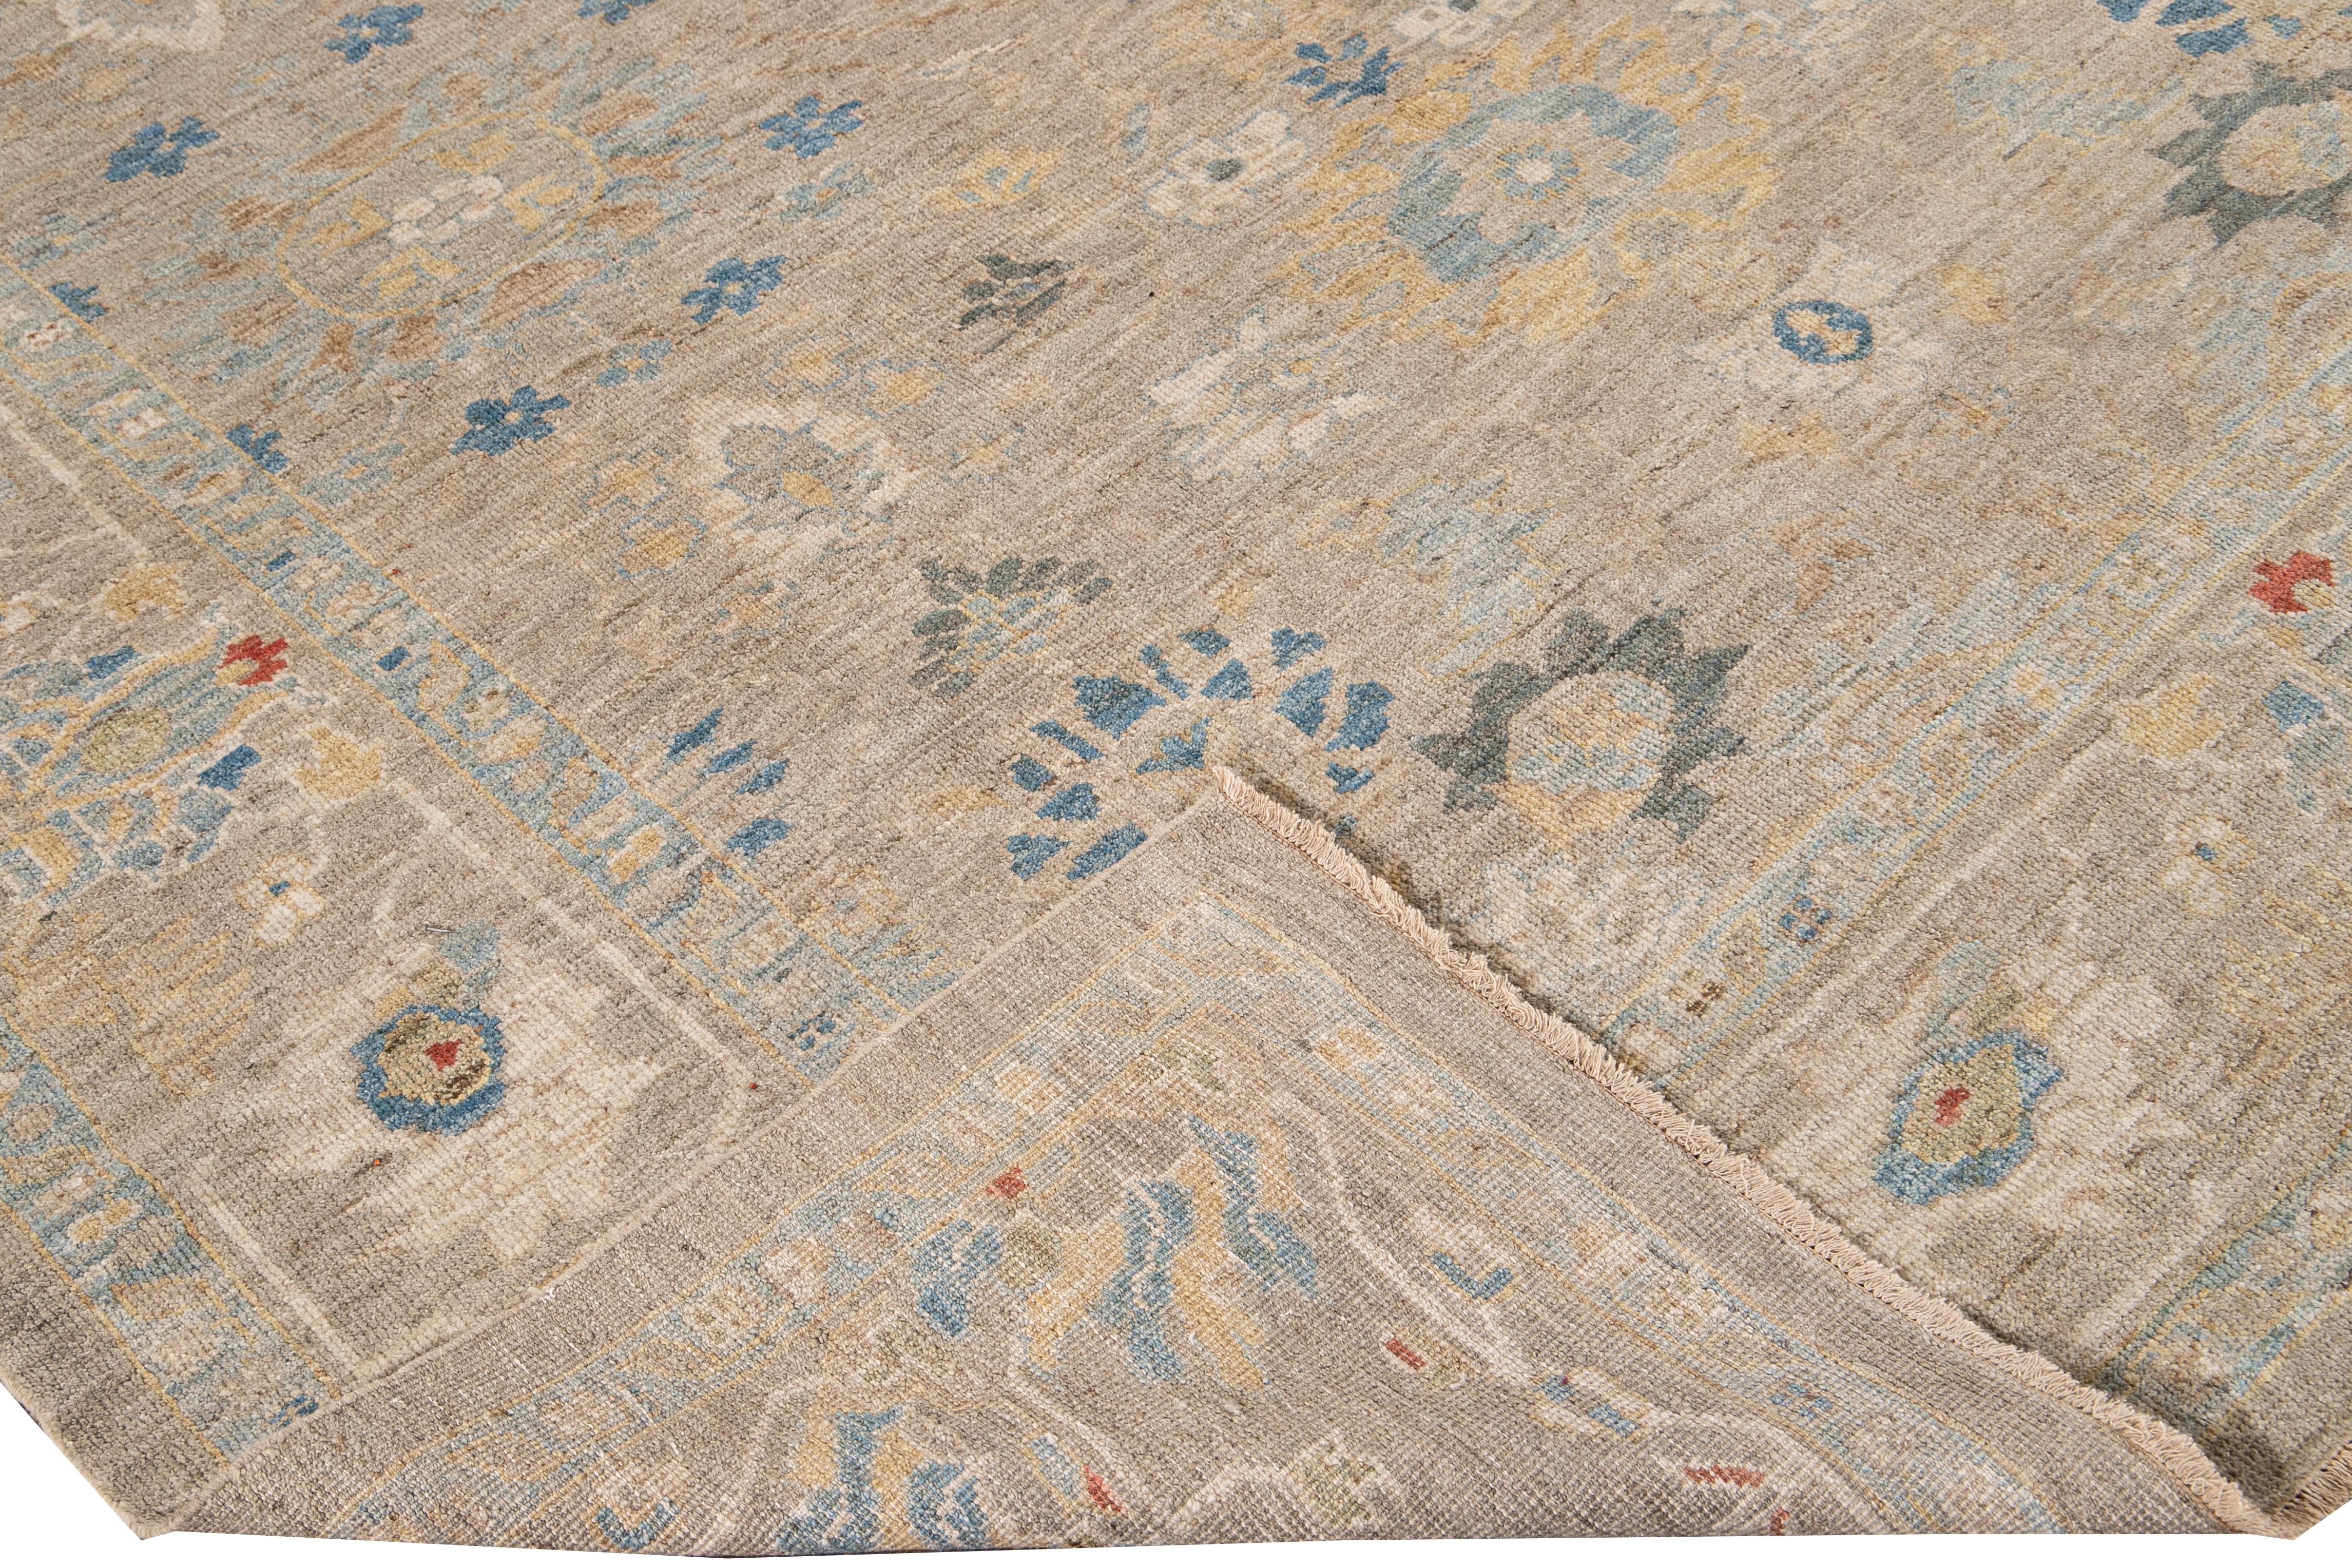 Beautiful modern Sultanabad hand-knotted wool rug with a beige field. This Sultanabad rug has an ivory, yellow, blue, and orange accent in a gorgeous all-over Classic floral design.

This rug measures: 8'4